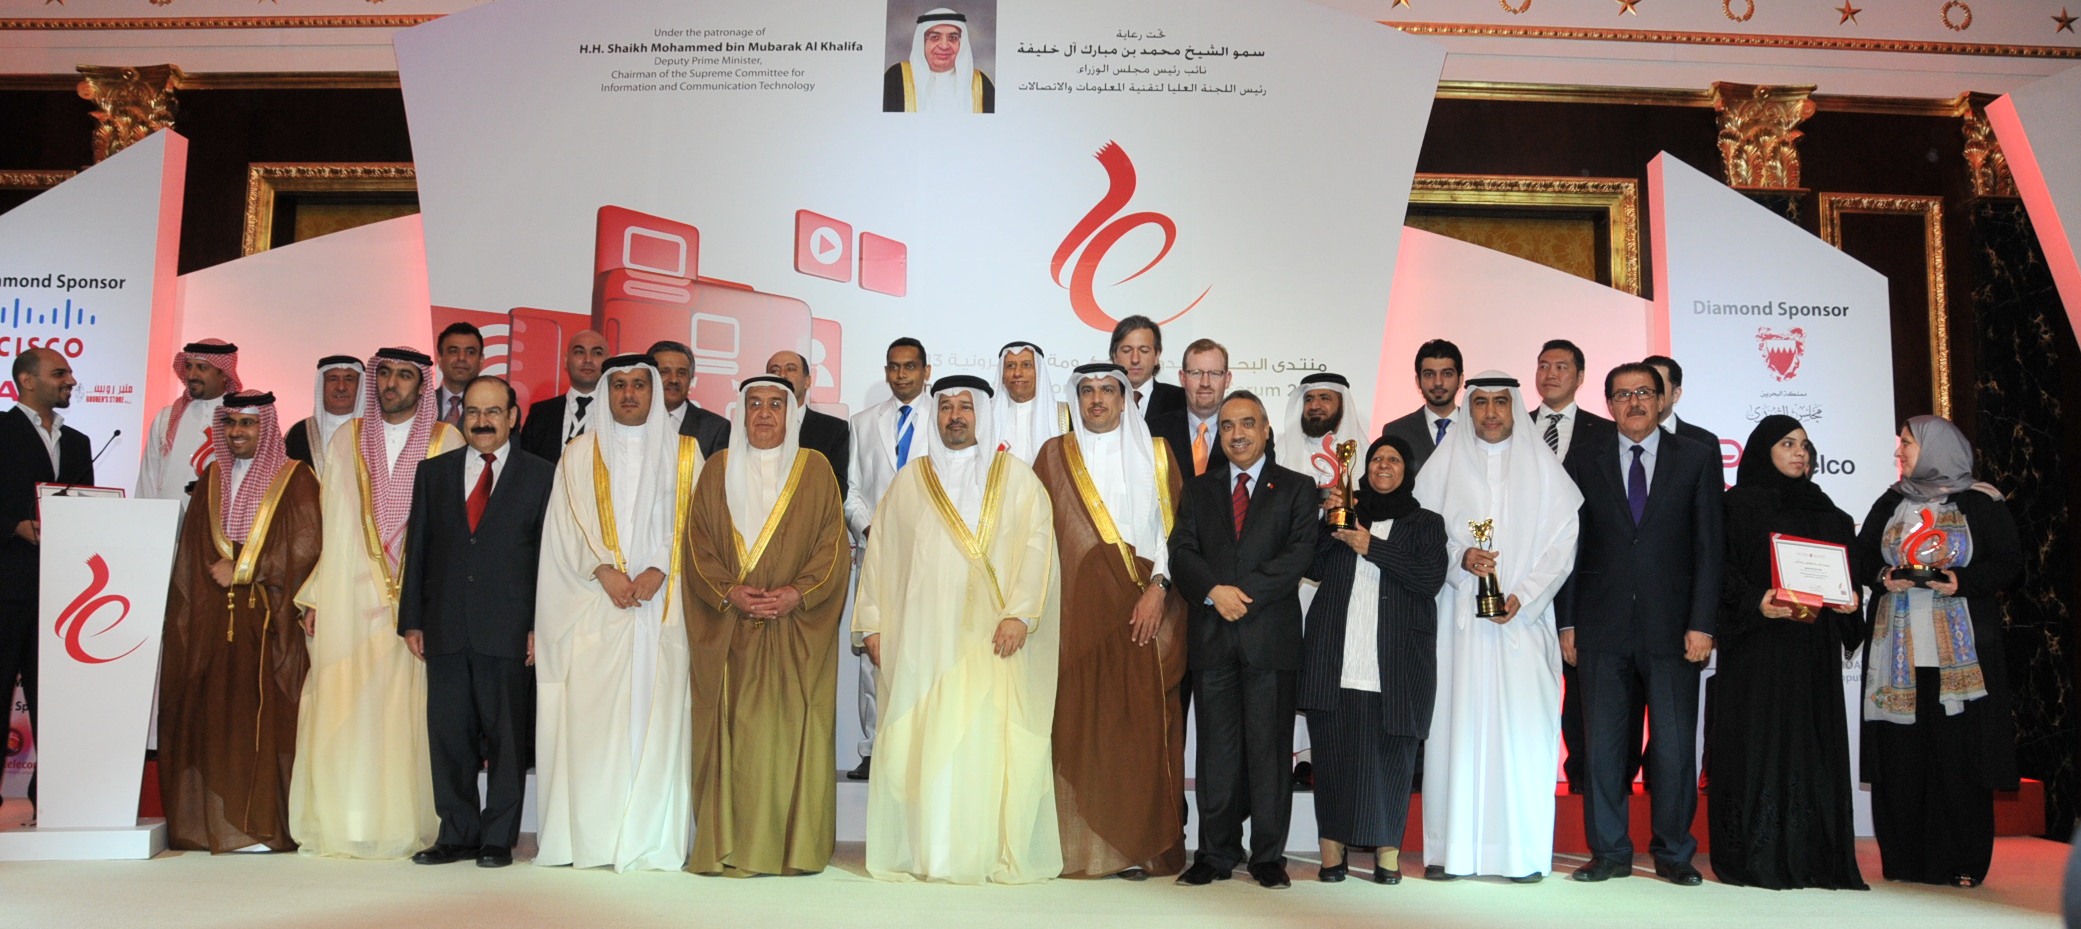 Information & eGovernment Authority Organizes Excellence Award 2013